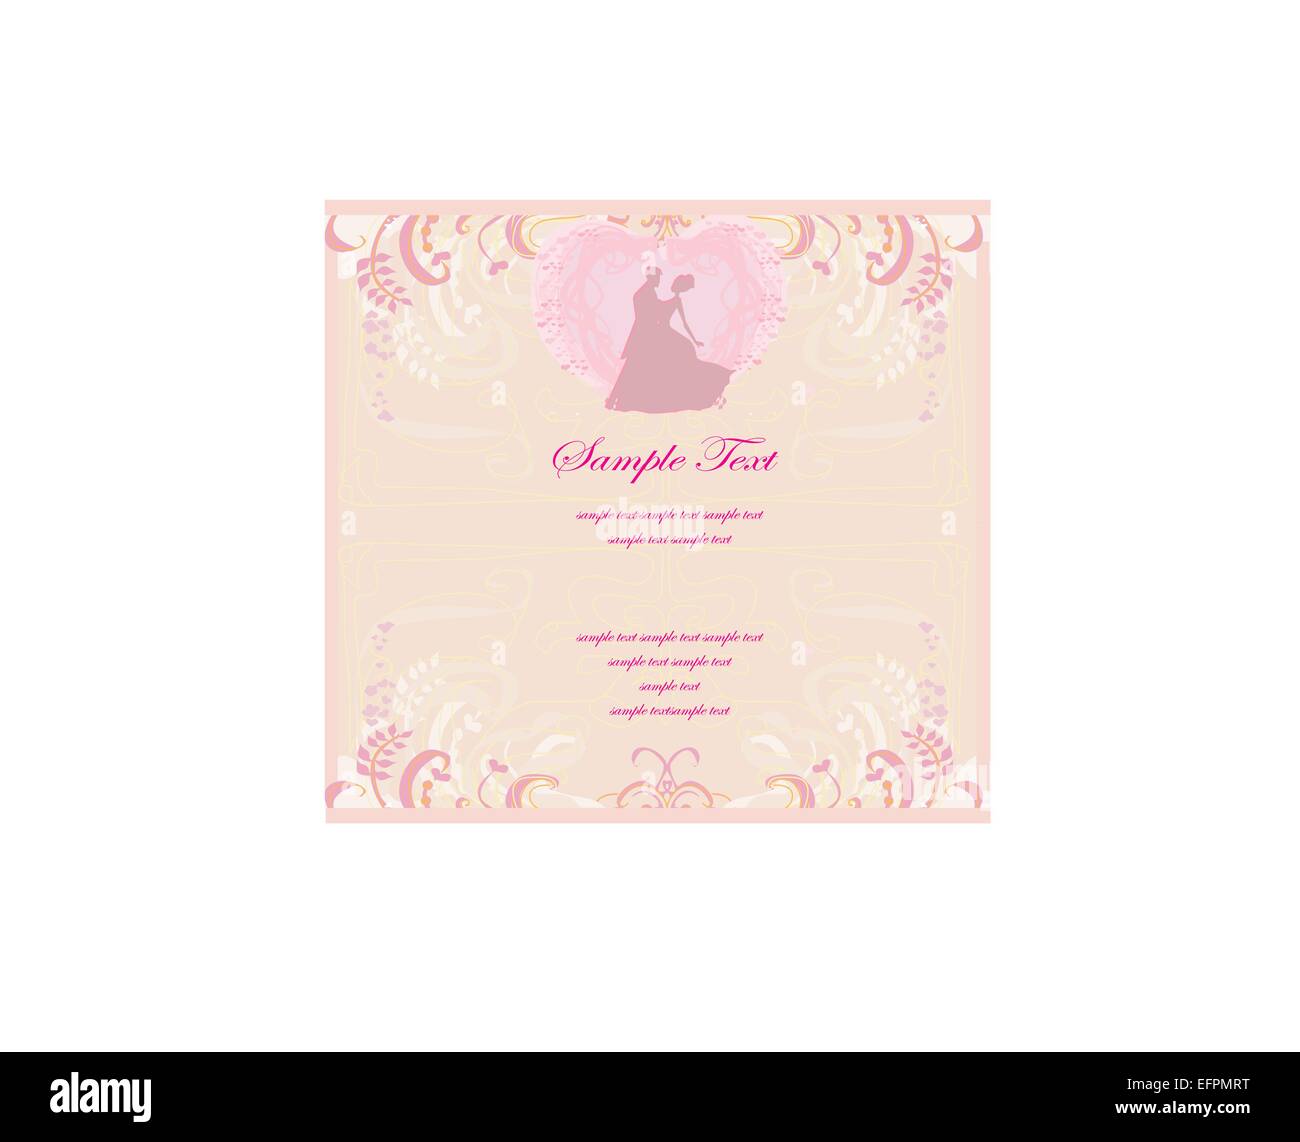 Ballroom Couple Dancers Silhouettes Abstract Invitation